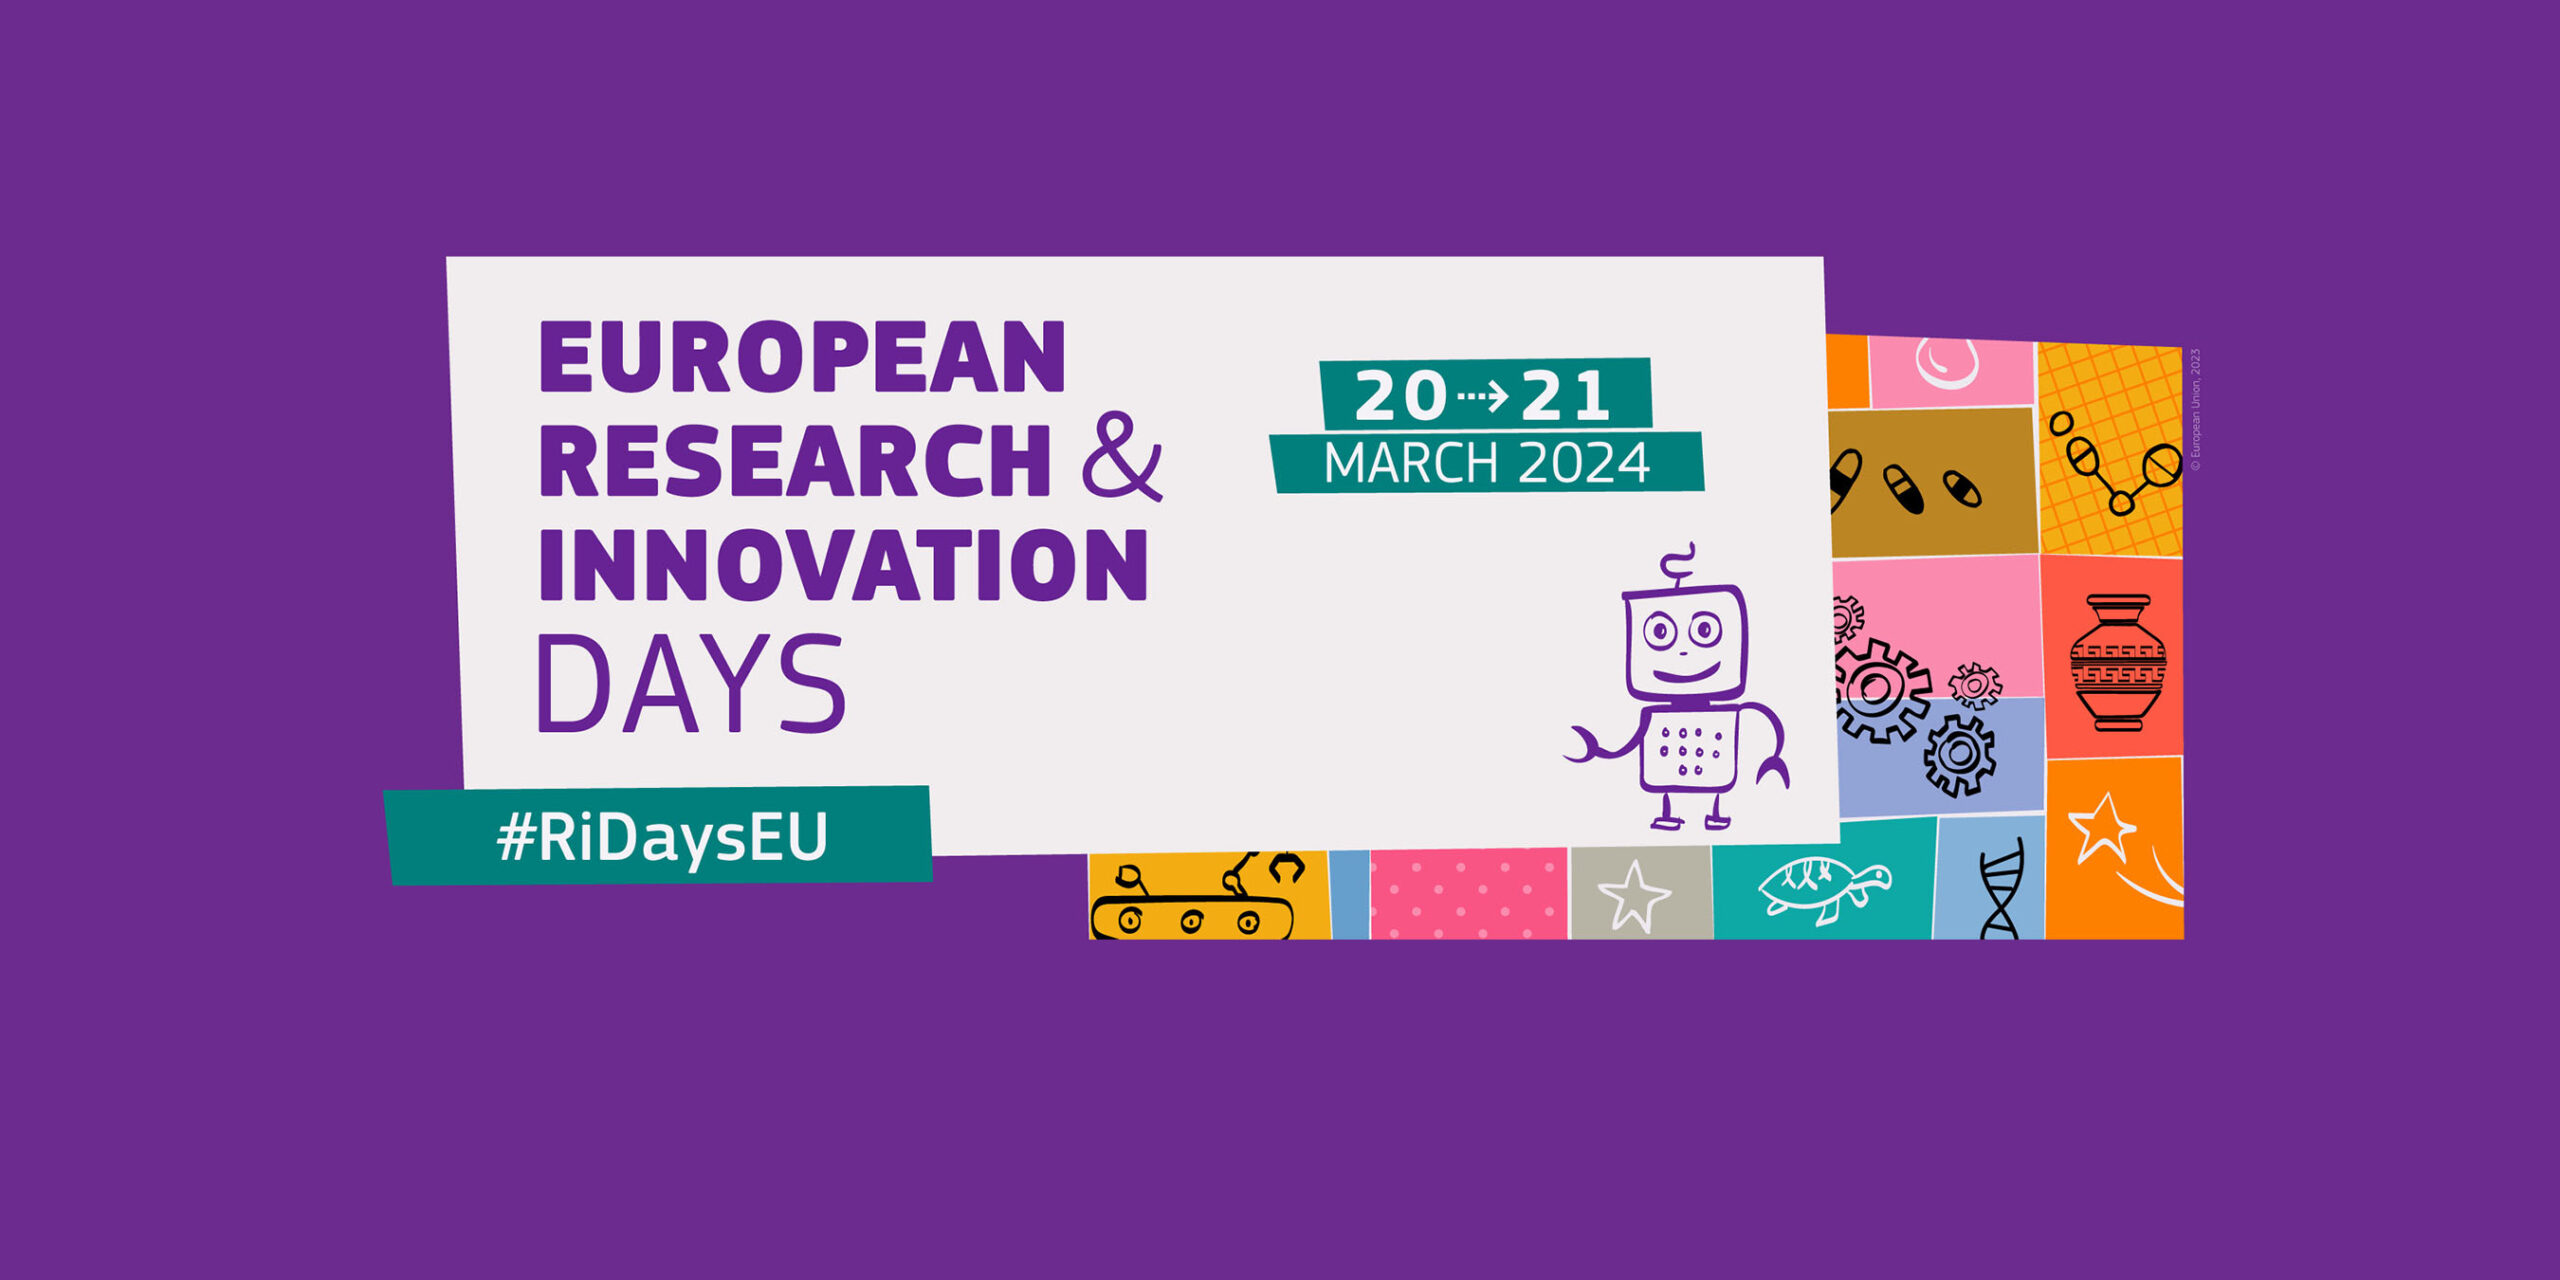 European Research & Innovation Days 2024